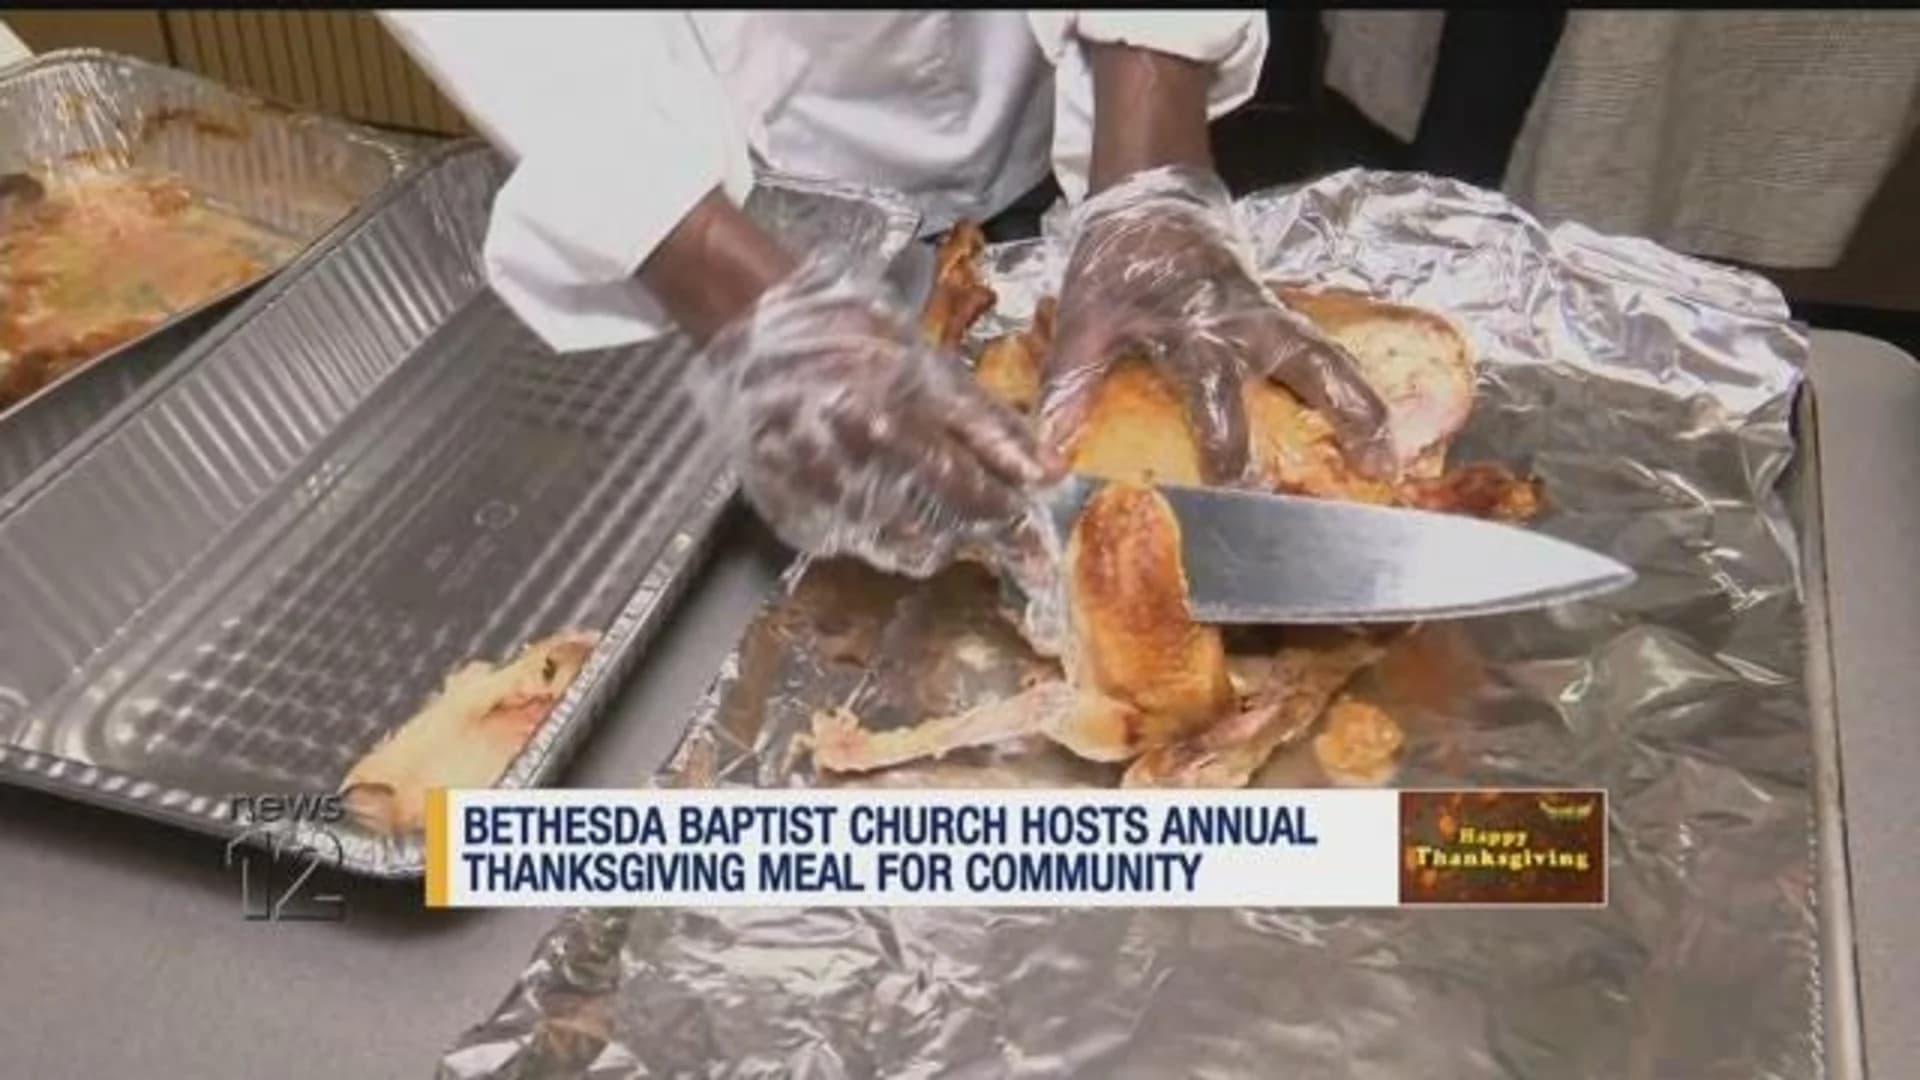 Bethesda Baptist Church hosts annual Thanksgiving meal for the community